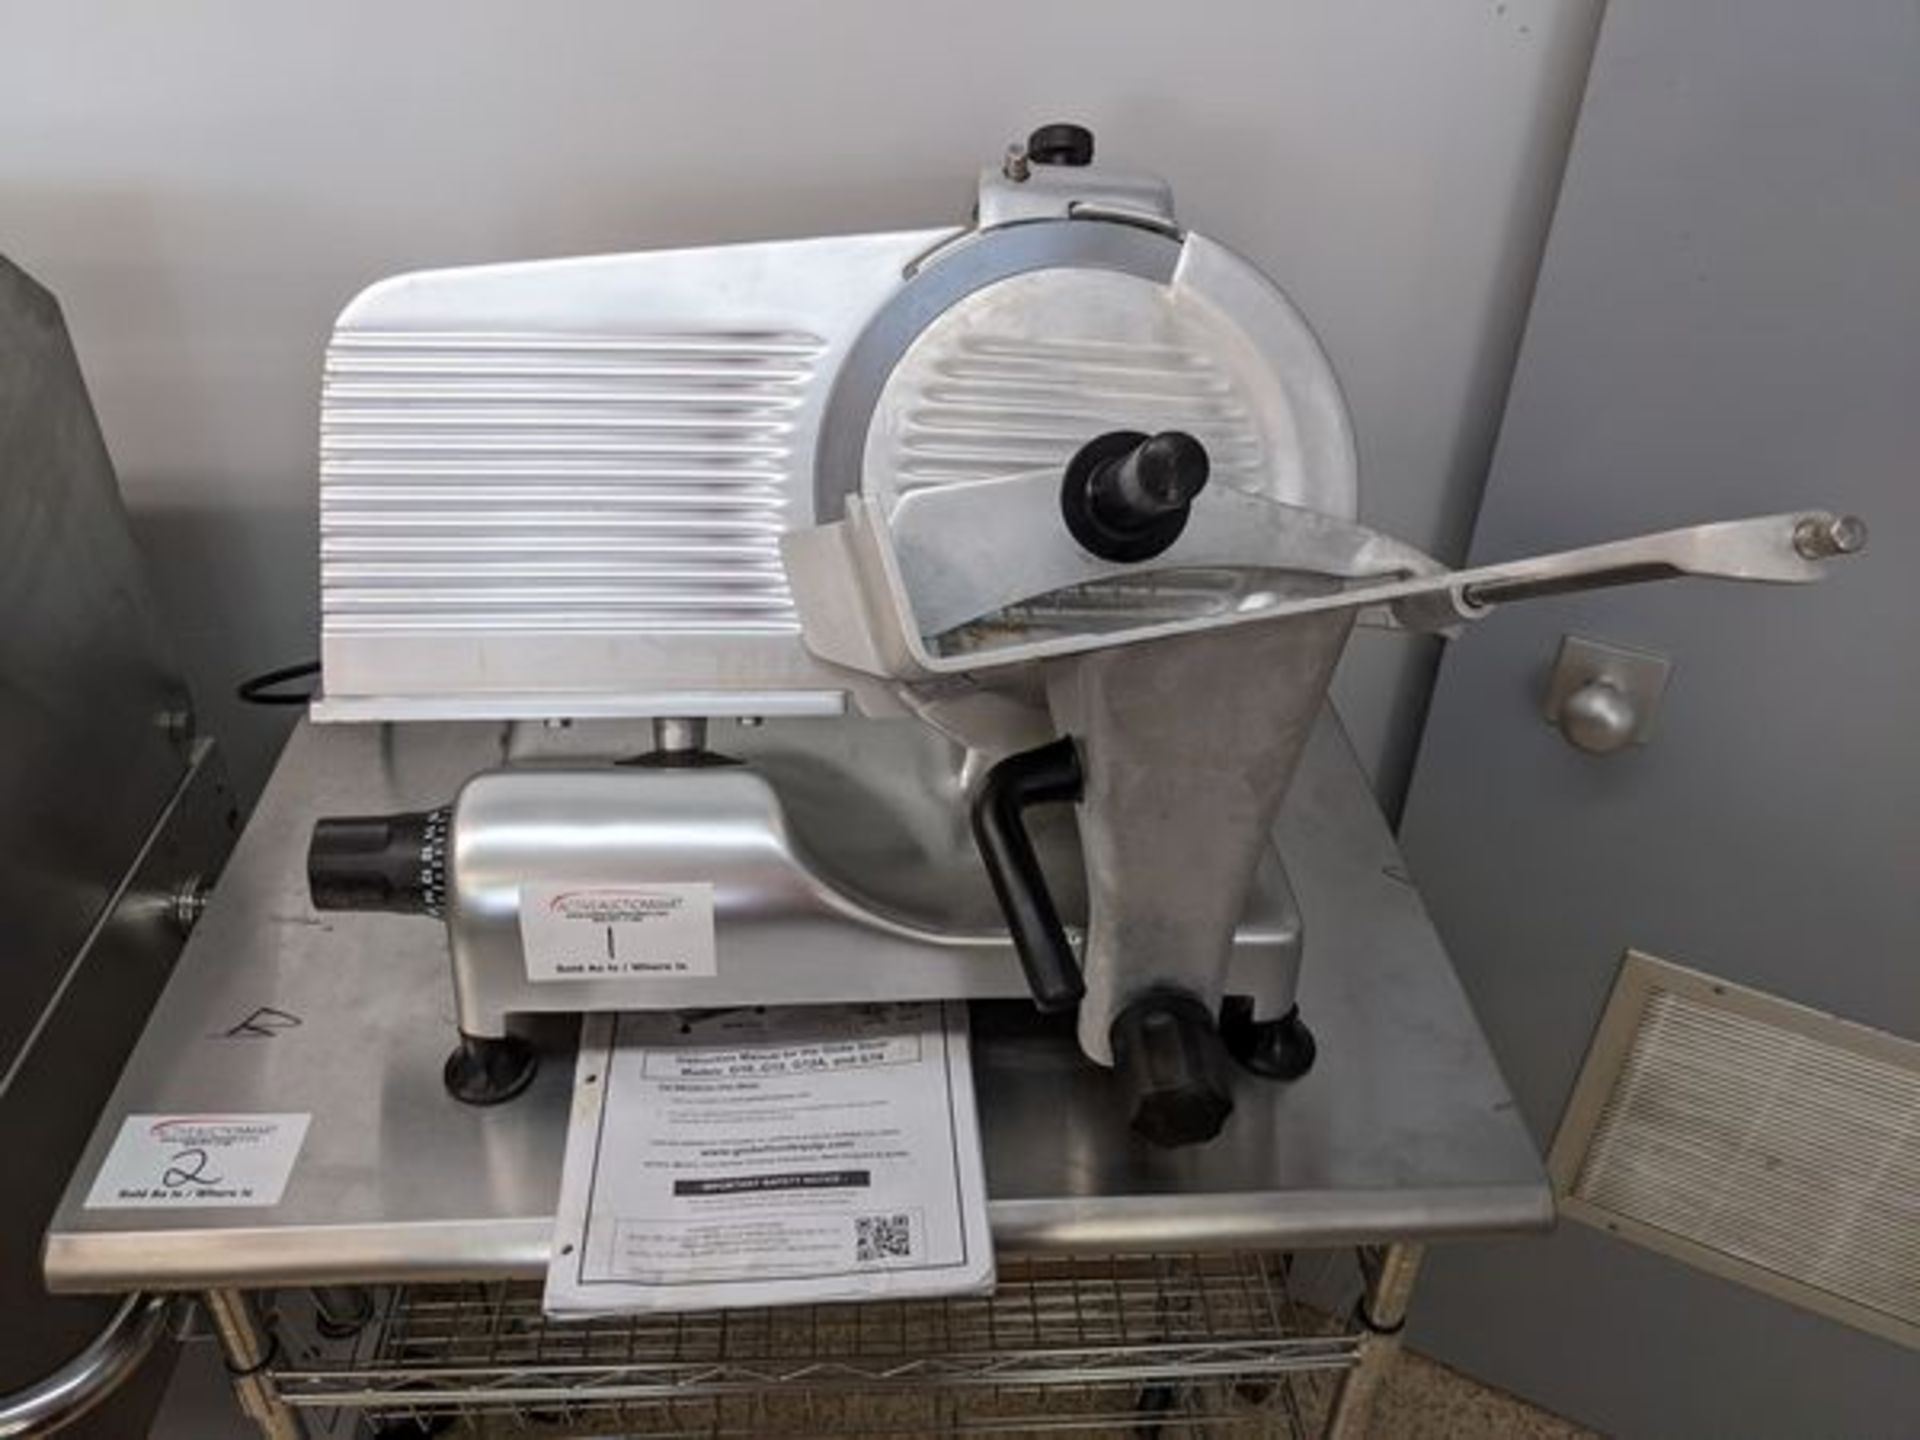 Globe G12 Meat Slicer with Manual